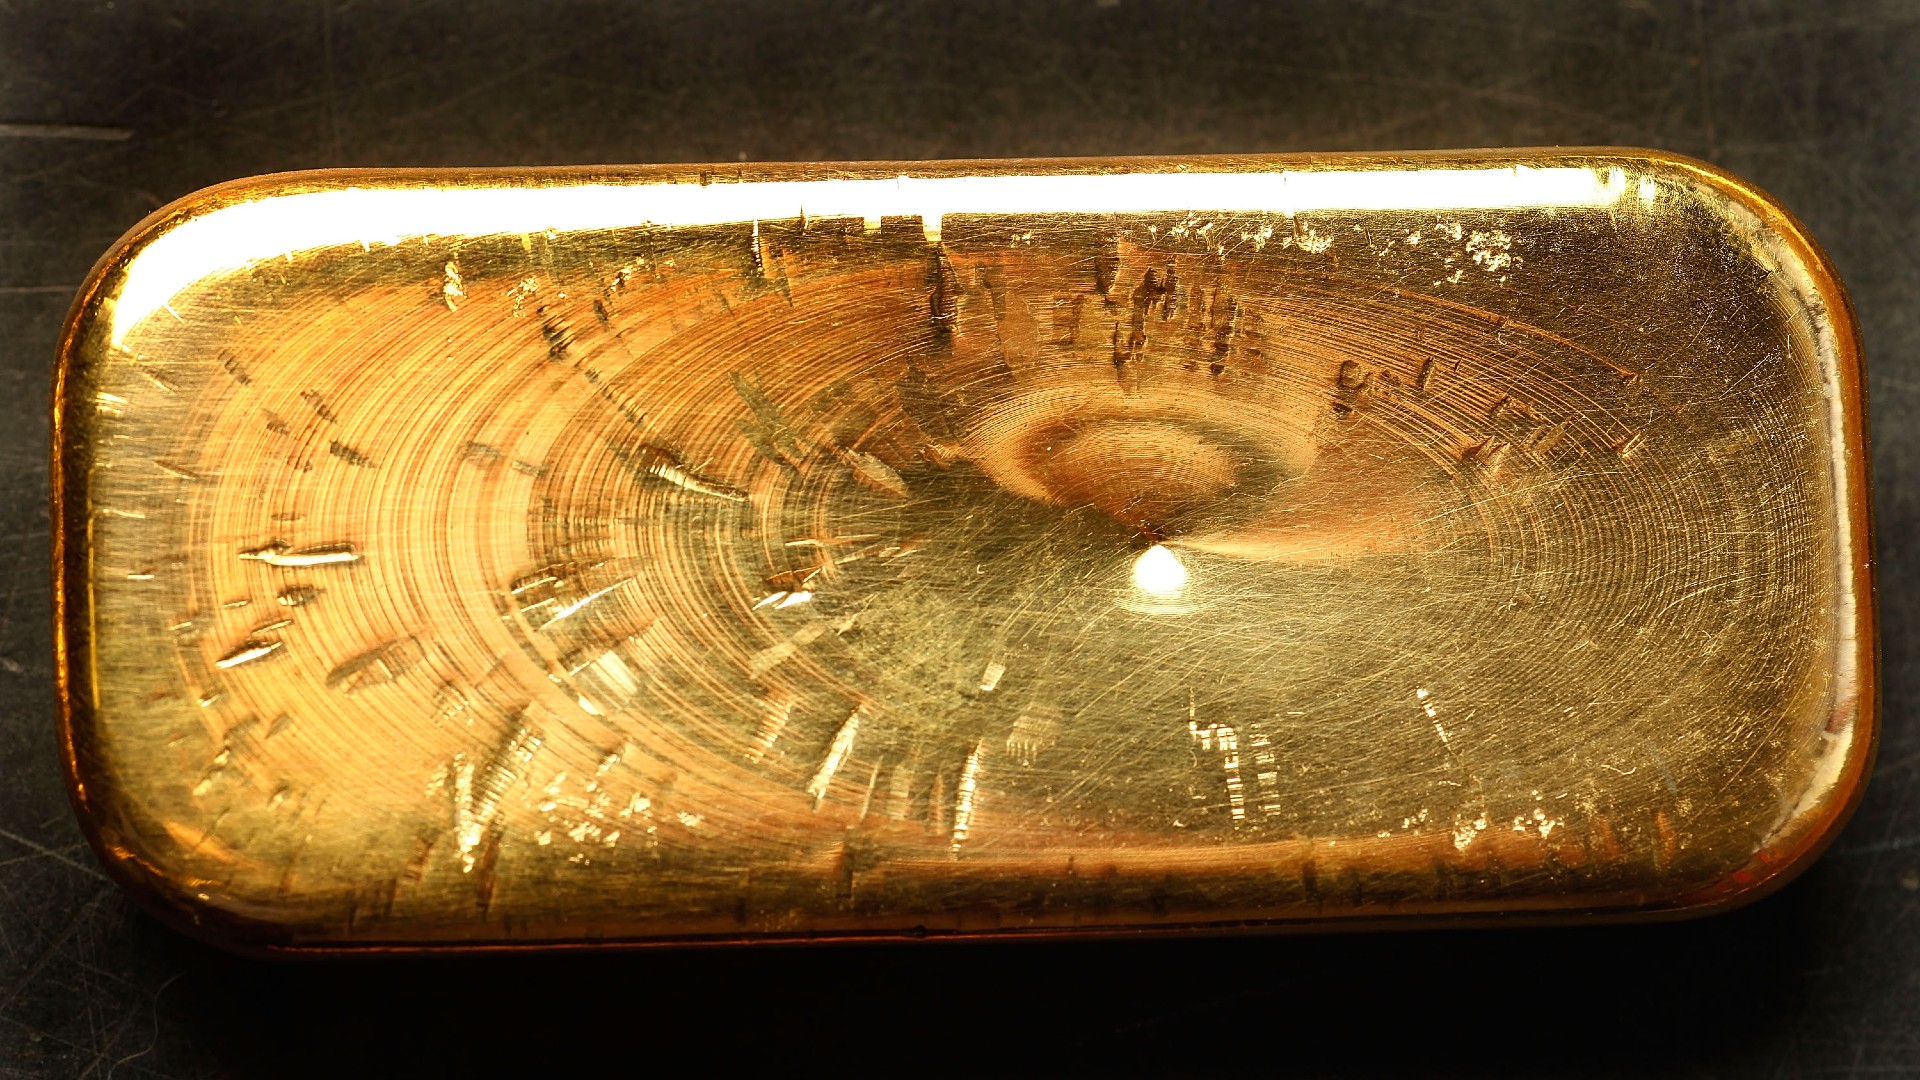 A detail of an ingot of recycled gold bullion displayed at the workshop of 'Gold By Gold', on January 28, 2012 in Paris, France.